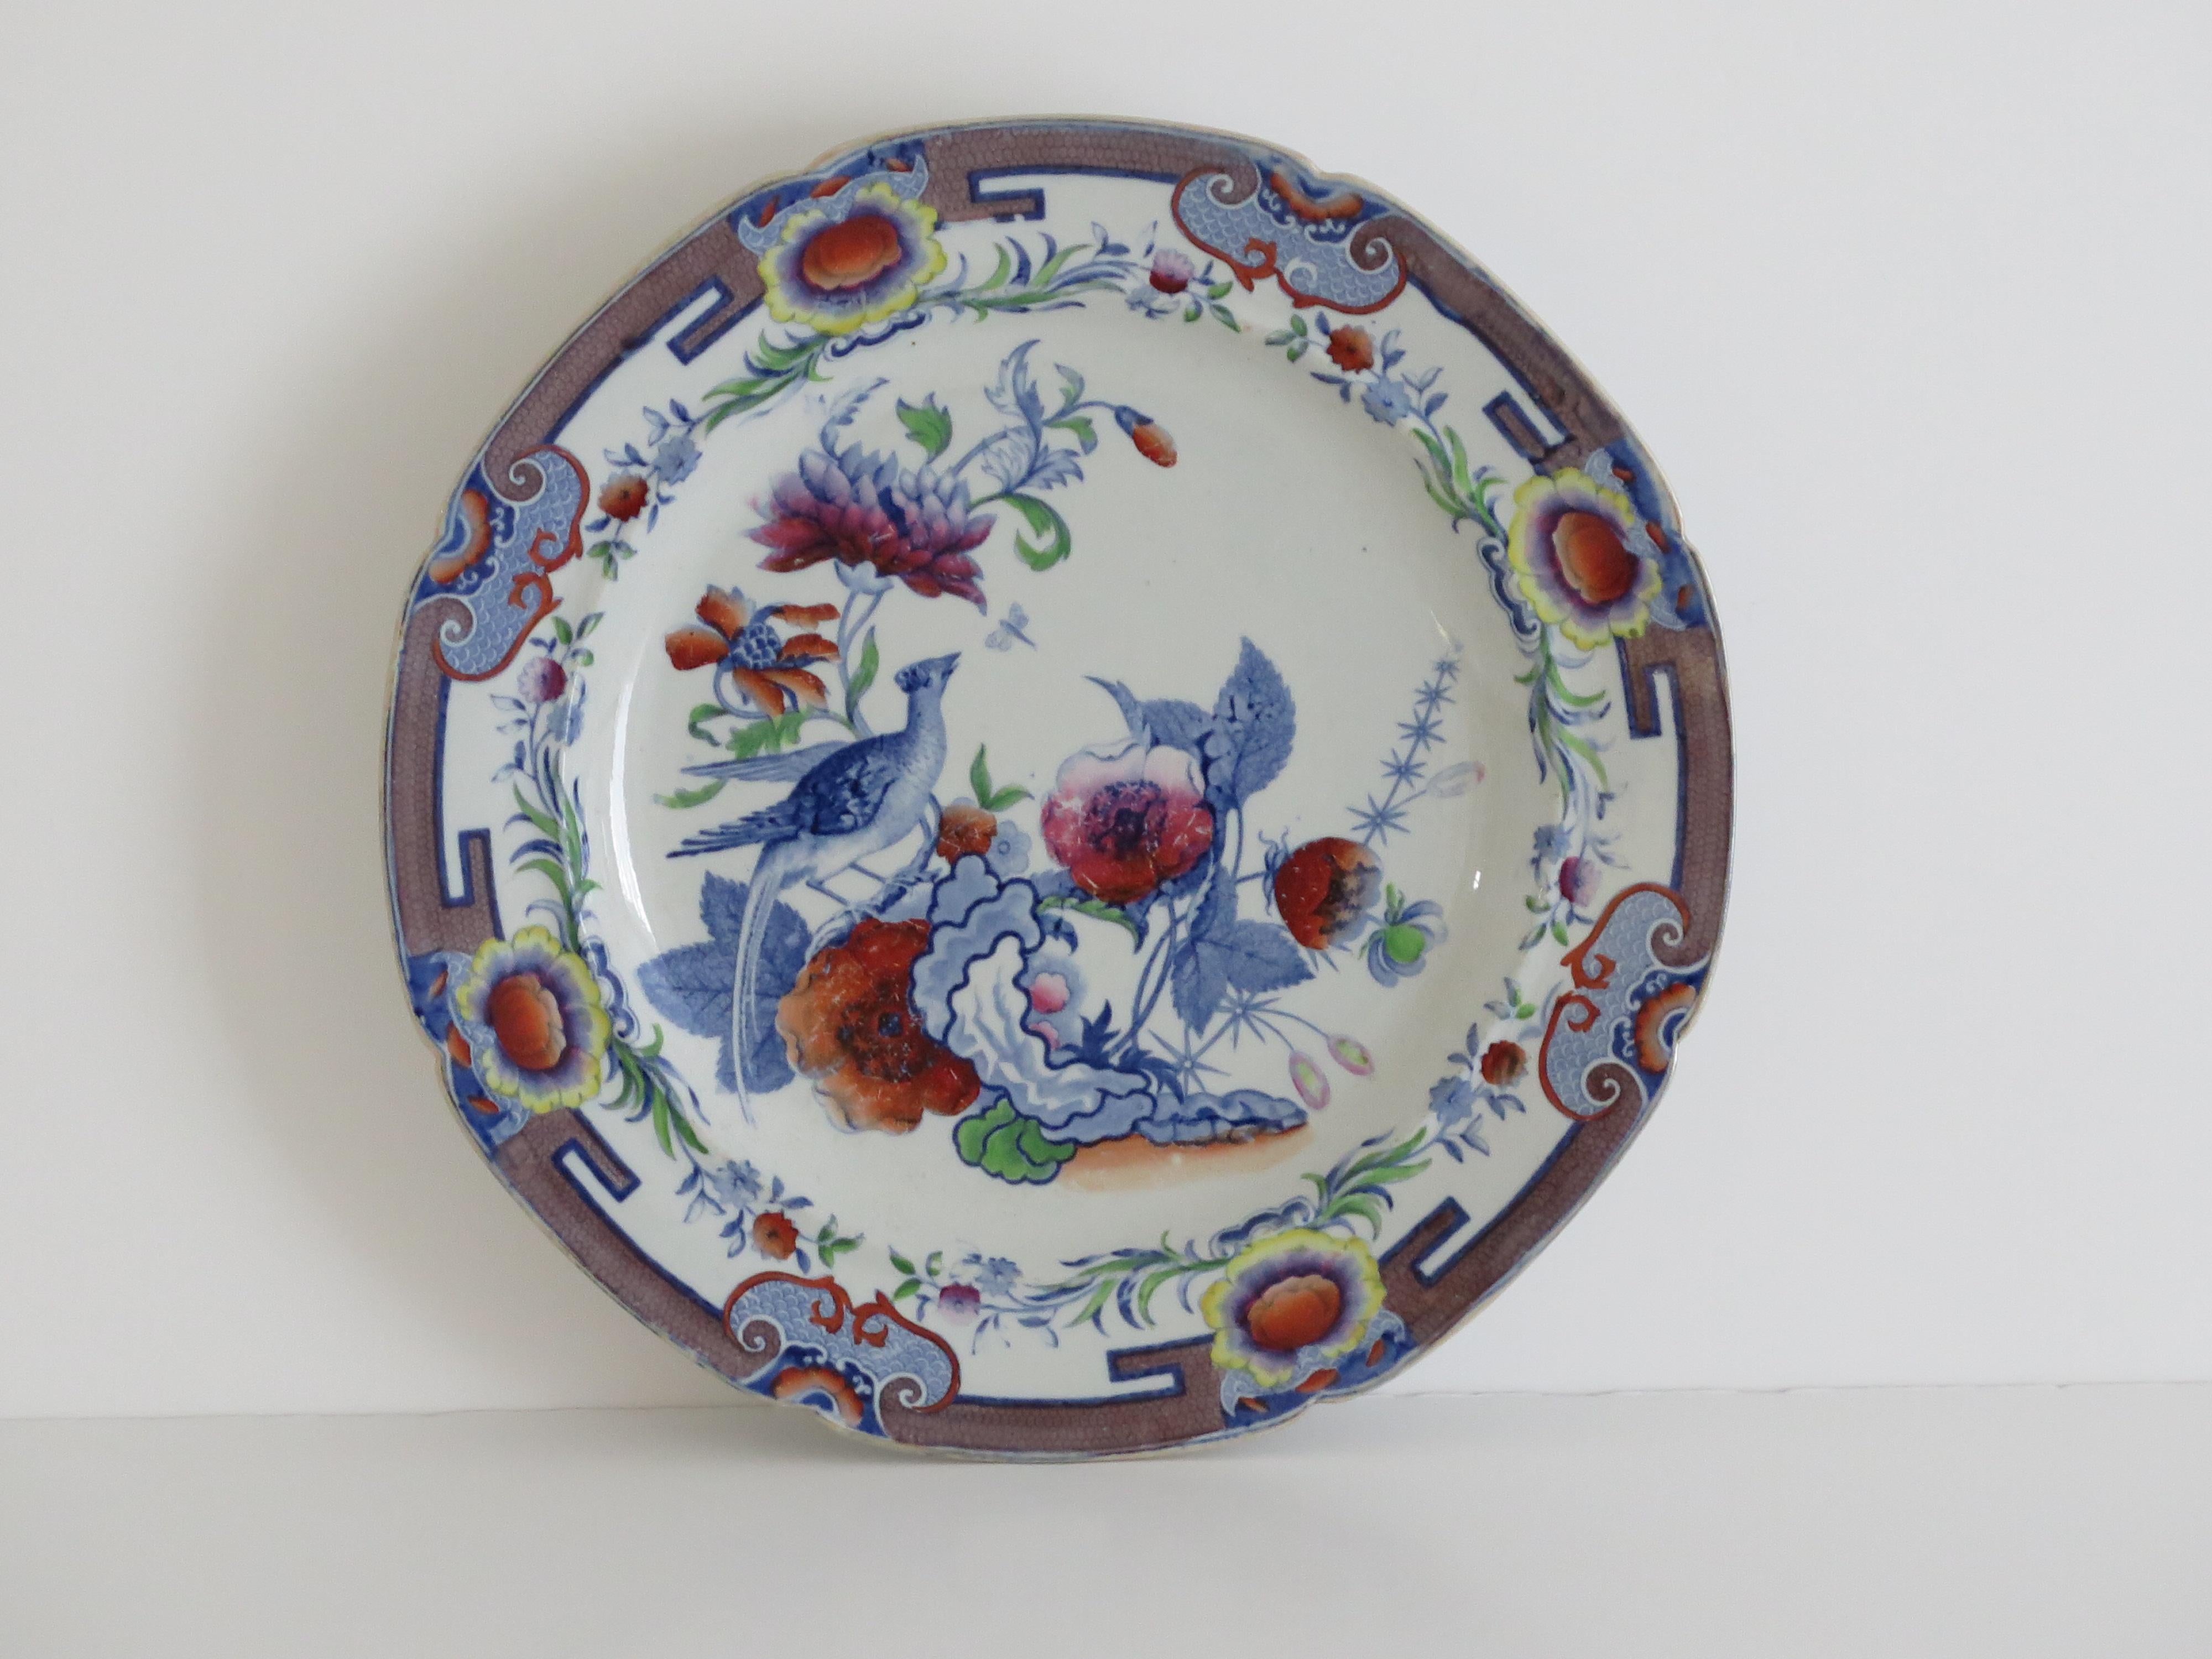 This is a very good Dinner Plate in the Long Tailed Pheasant pattern No.2, made by Hicks and Meigh of Shelton, Staffordshire, England between 1812 and 1822, probably circa 1815.

This is a beautiful plate with a shaped notched edge to the rim.

The